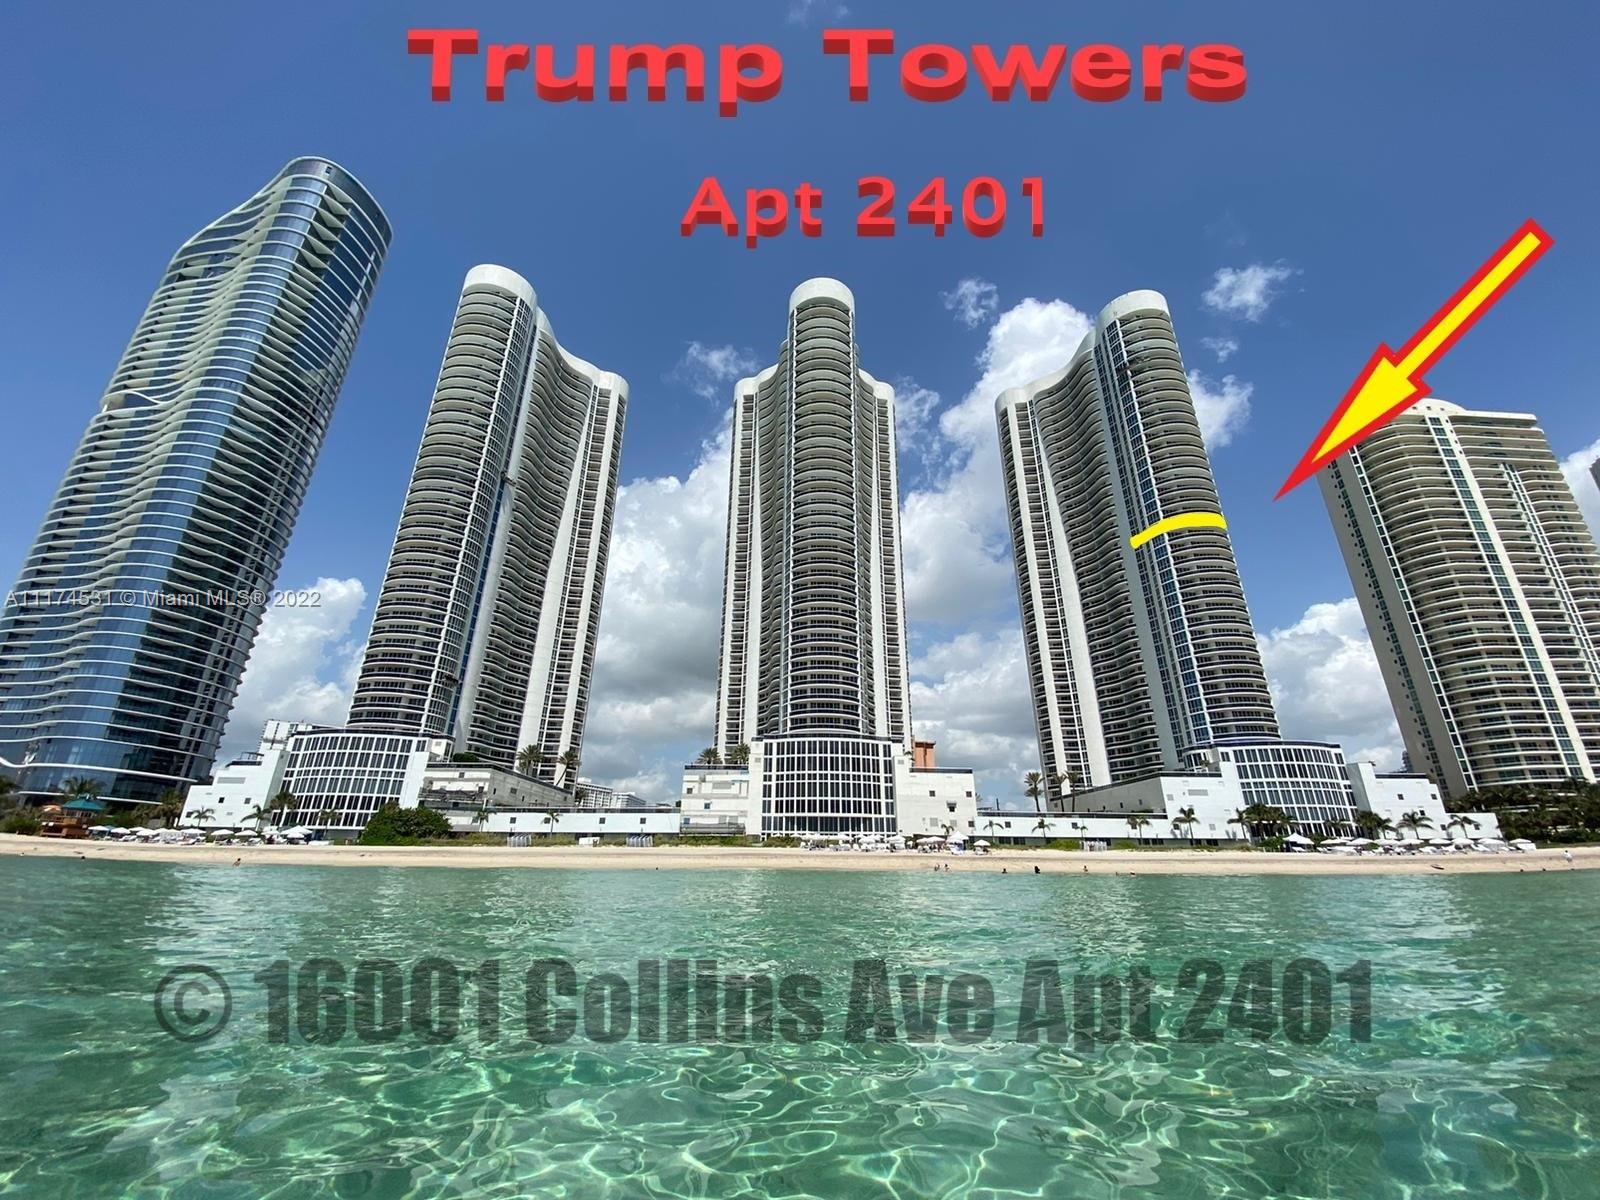 This is the best 3 beds & 3.5 baths at Trump Towers. Floor to ceiling windows, granite countertop, built-in coffee machine. Subzero & stainless-steel appliances, Italian cabinetry. Fitness center, spa, sauna, conference room, game room, valet, etc. *** 2022 HOA Fees - $949.35 (Master) + $1,523.38 (Tower I) = $2,472.73